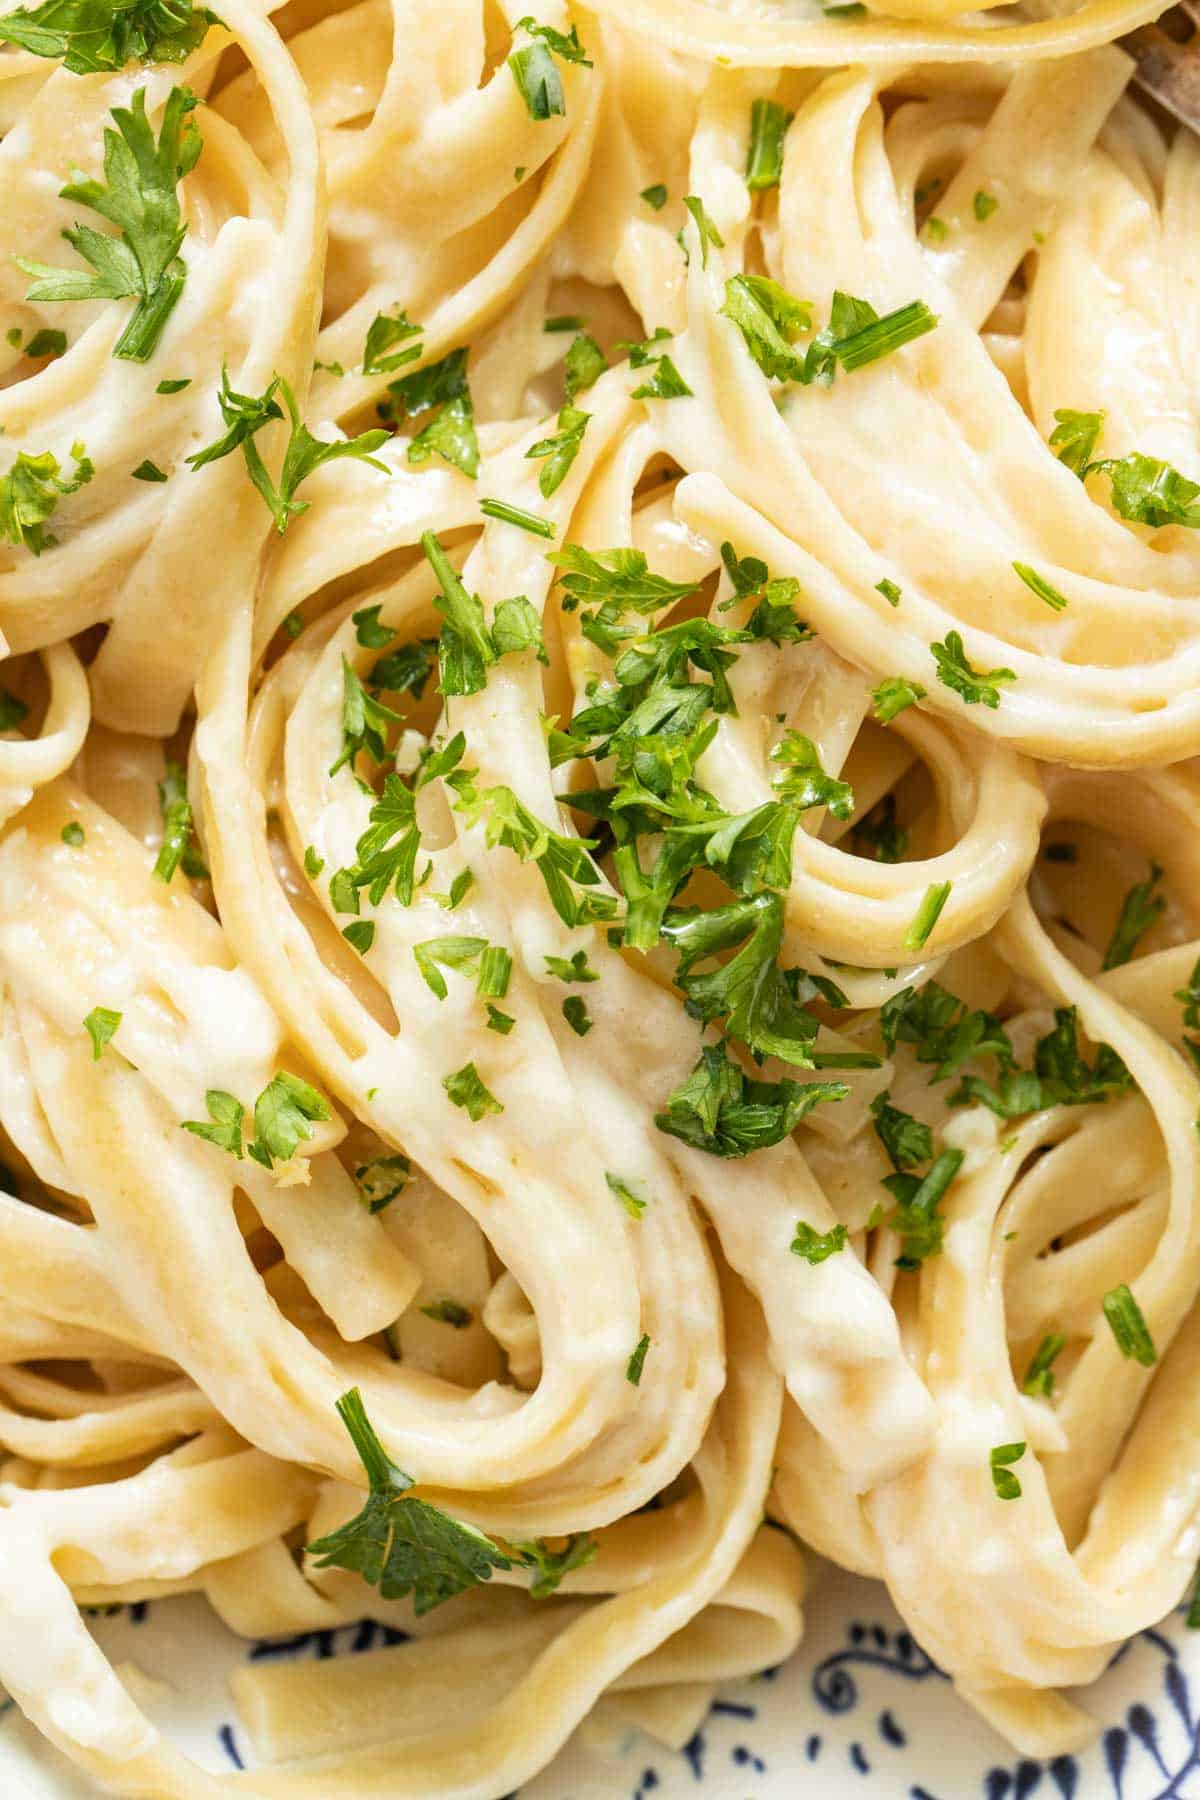 A close up of pasta coated in a creamy alfredo sauce with mozzarella cheese.